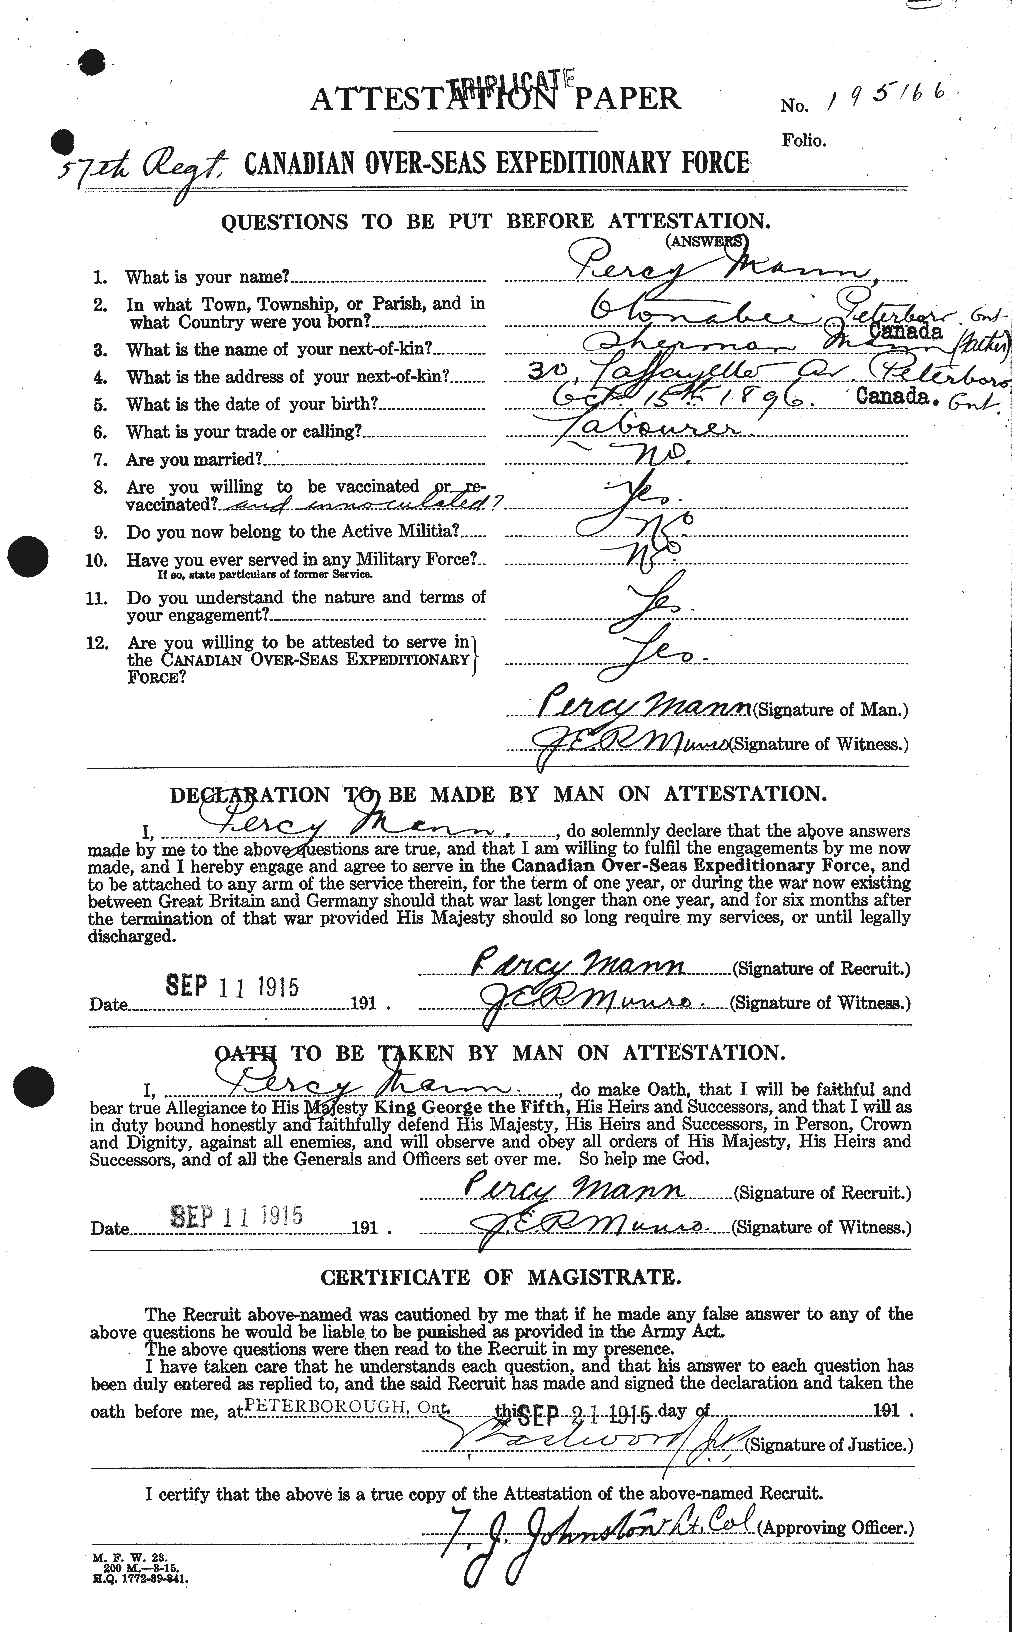 Personnel Records of the First World War - CEF 477276a